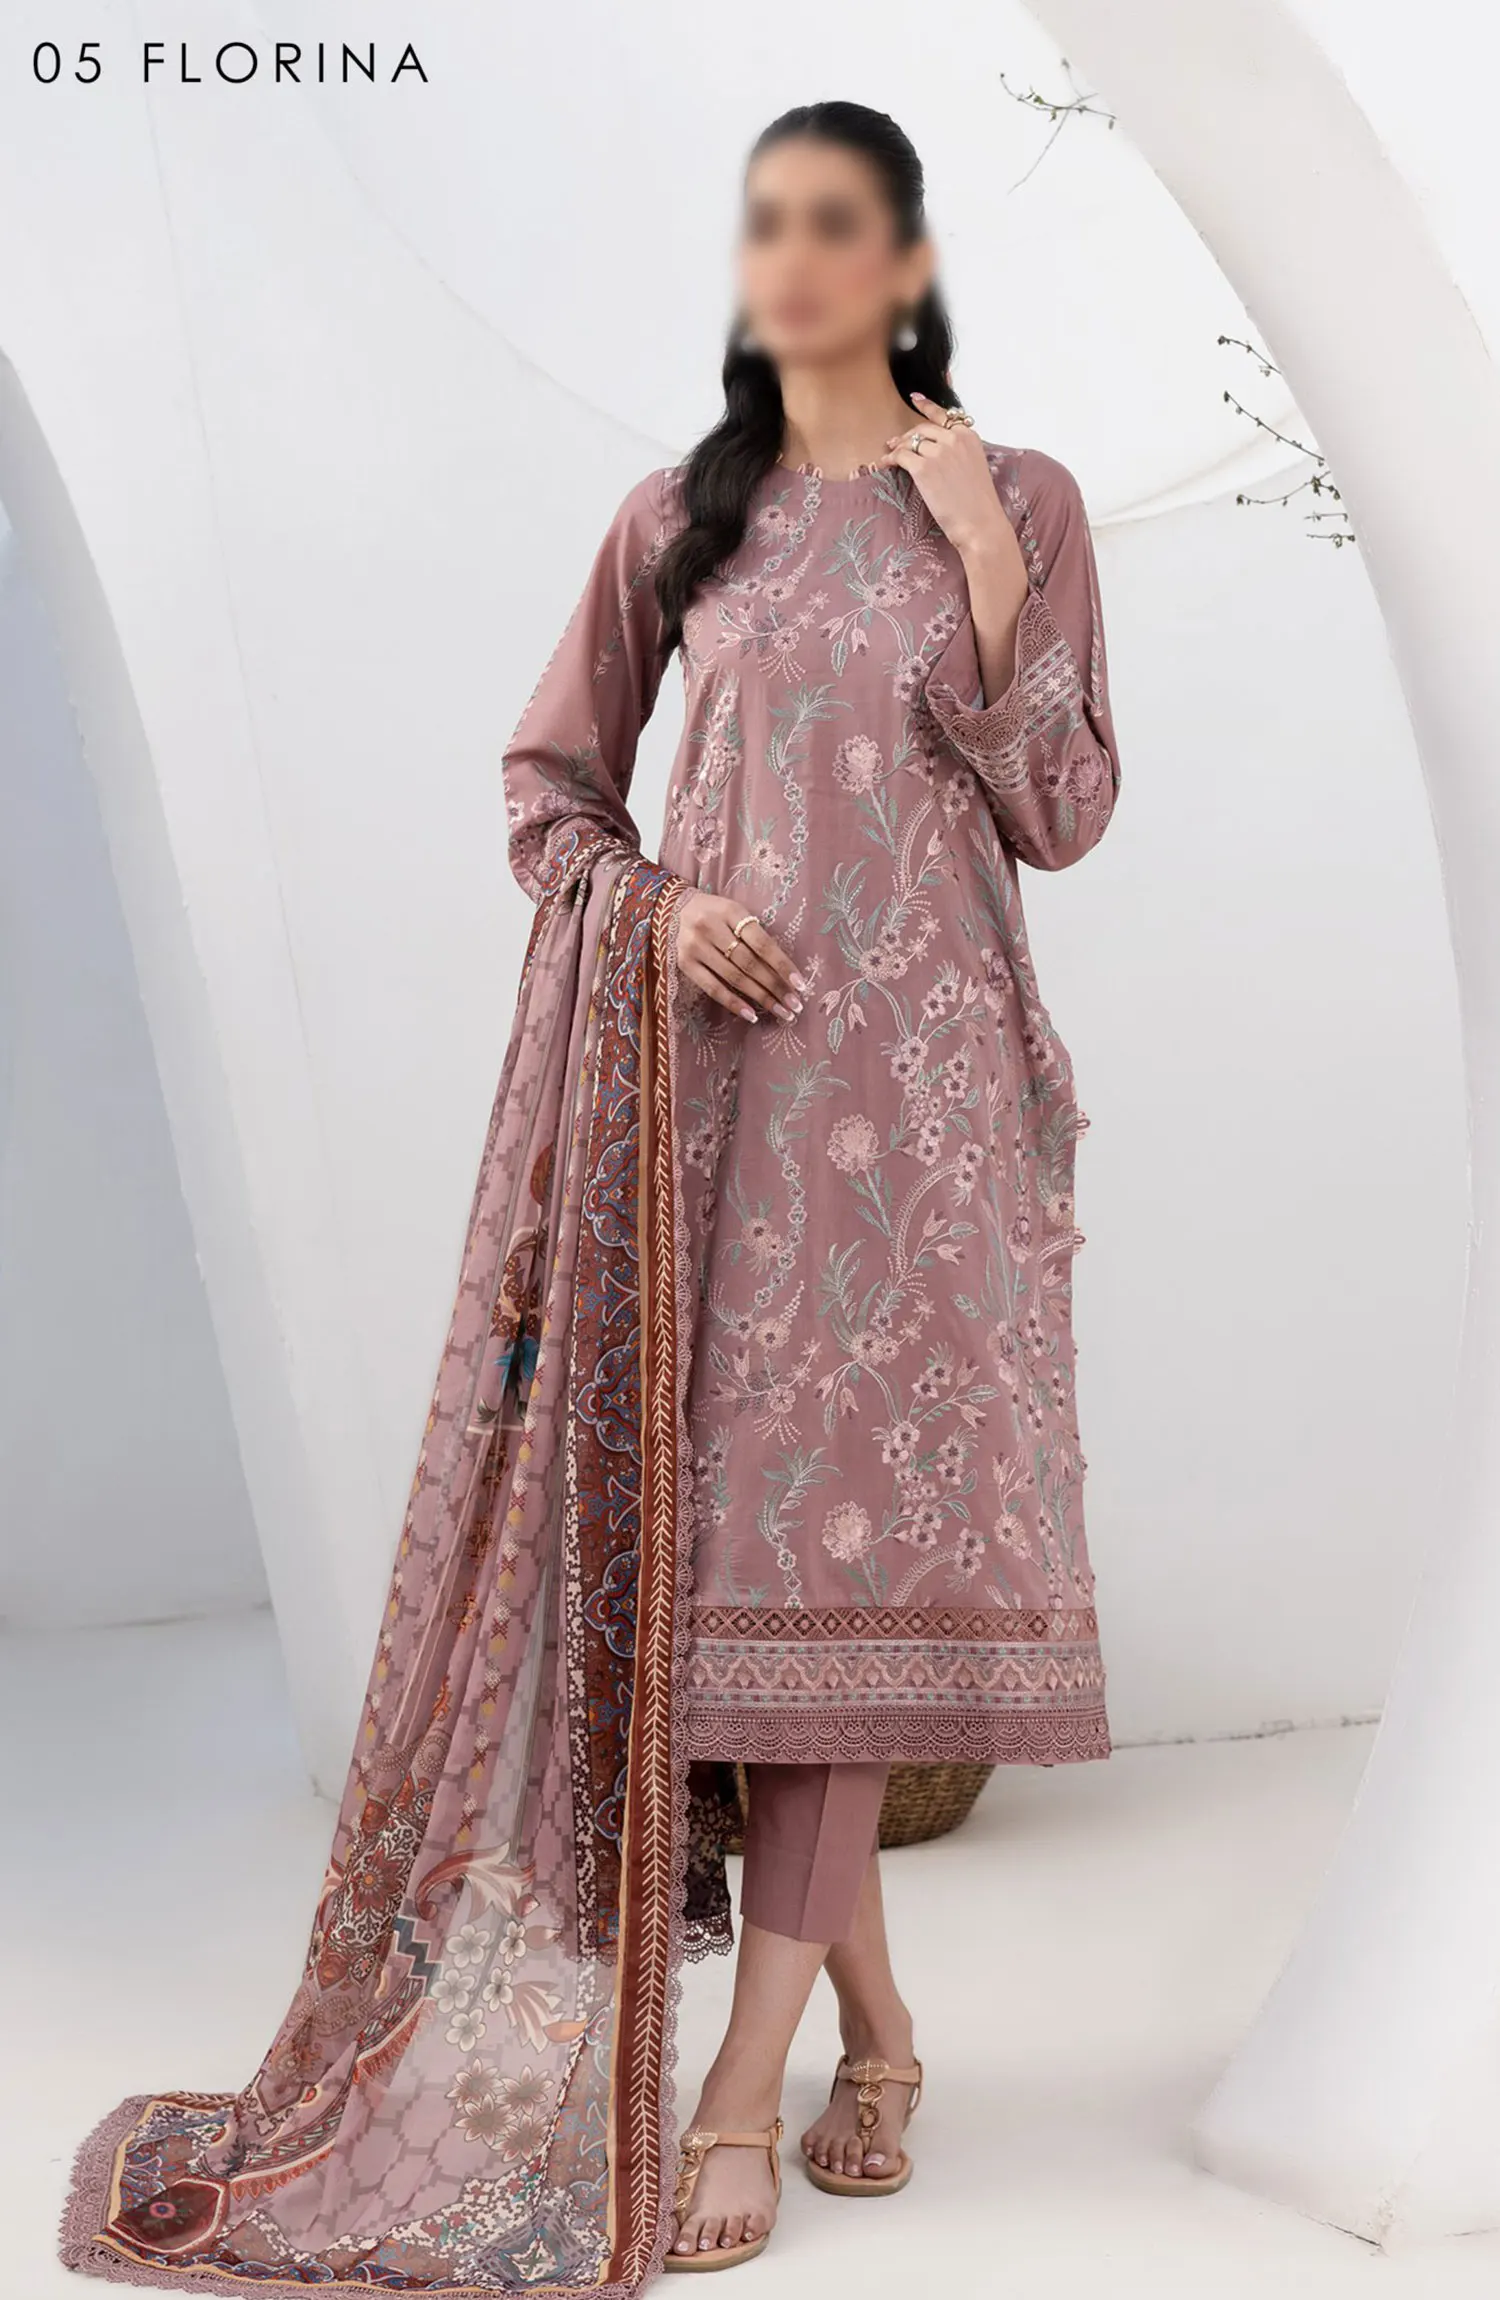 Zarif Eid Lawn Embroidered and Printed Edit - ZL 05 FLORINA